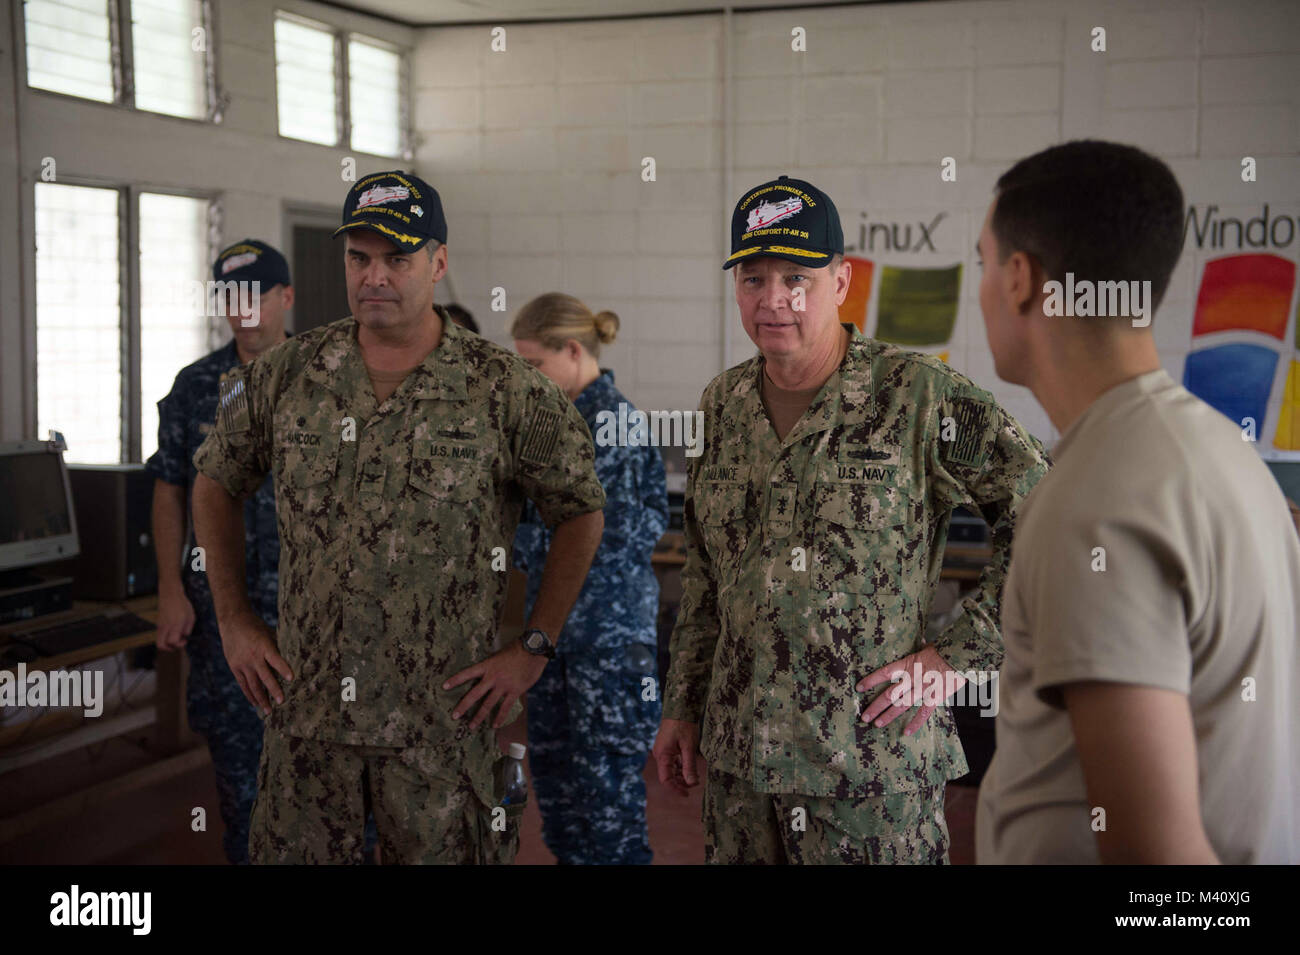 150904-N-KG407-175 COROCITO, Honduras (Sept. 4, 2015) Capt. Sam Hancock, left, Continuing Promise 2015 mission commander, and Rear Adm. George Ballance, Commander, U.S. Naval Forces Southern Command/ U.S. 4th Fleet, tour a medical site established at Centro de Educacion Basica Dr. Jesus Aquilar Paz in support of Continuing Promise 2015. Continuing Promise is a U.S. Southern Command-sponsored and U.S. Naval Forces Southern Command/U.S. 4th Fleet-conducted deployment to conduct civil-military operations including humanitarian-civil assistance, subject matter expert exchanges, medical, dental, ve Stock Photo